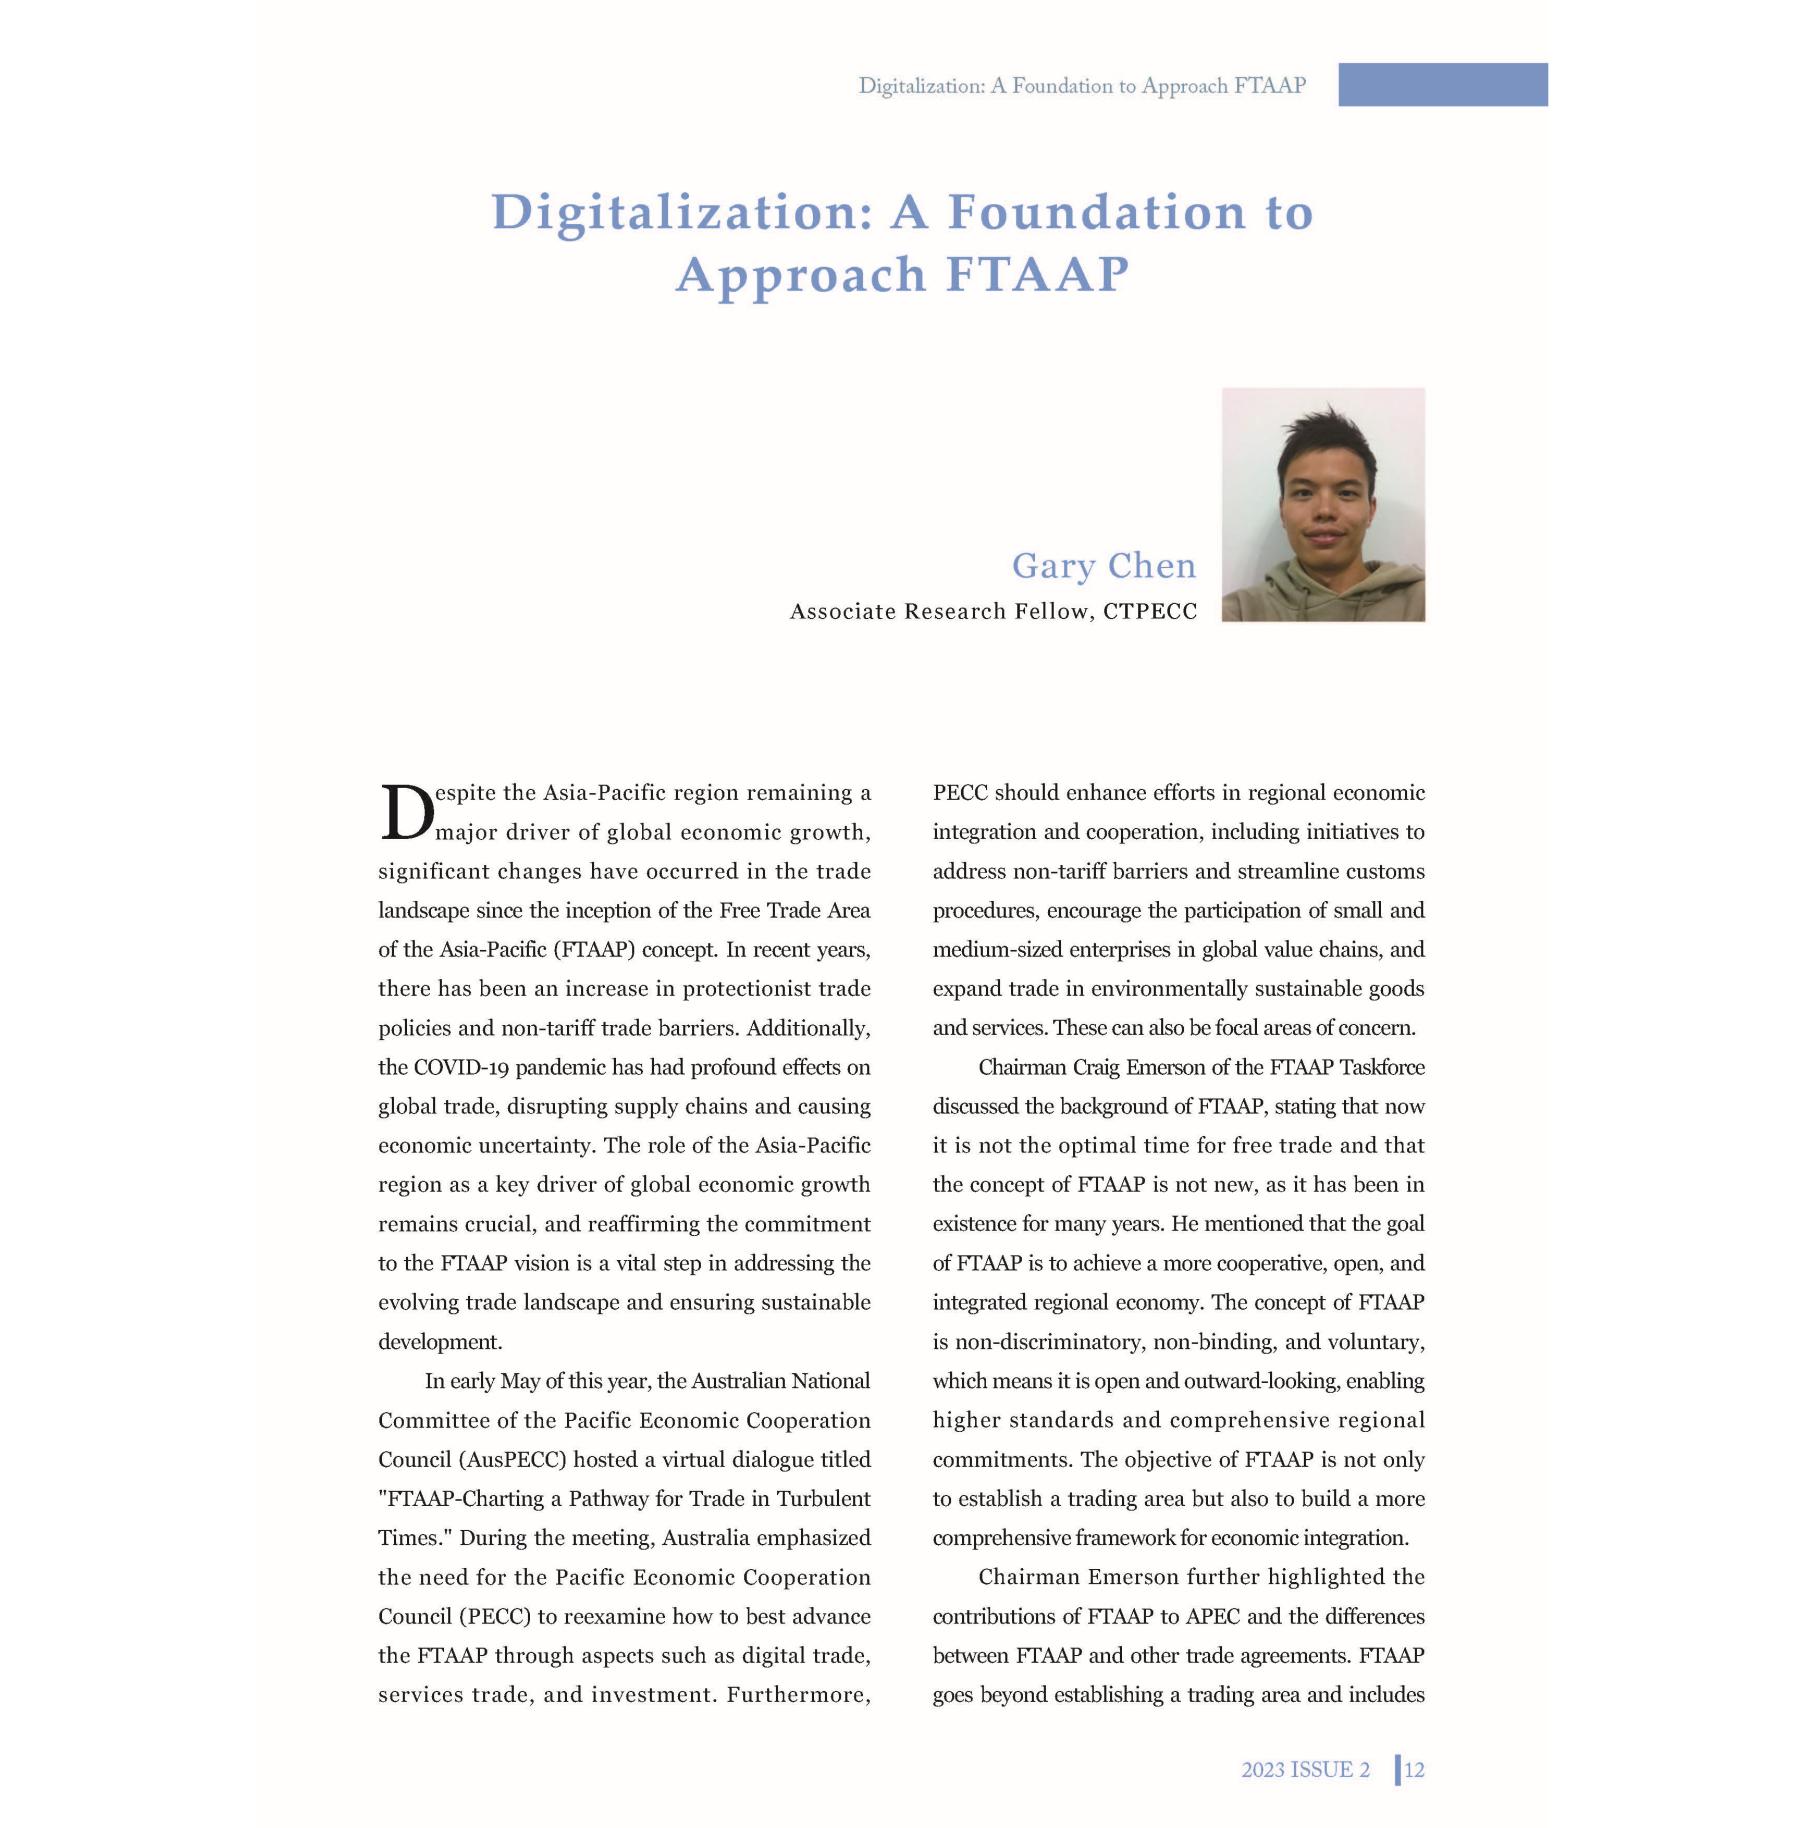 Digitalization: A Foundation to Approach FTAAP